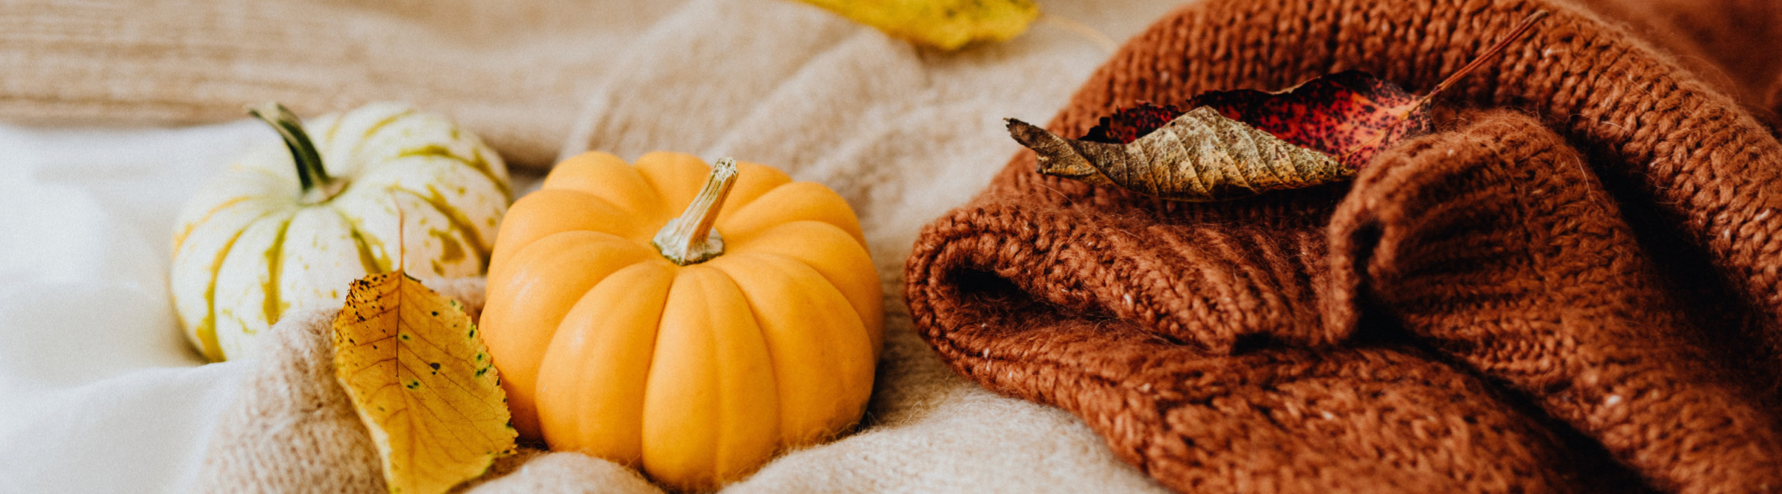 Our top tips for the perfect Halloween